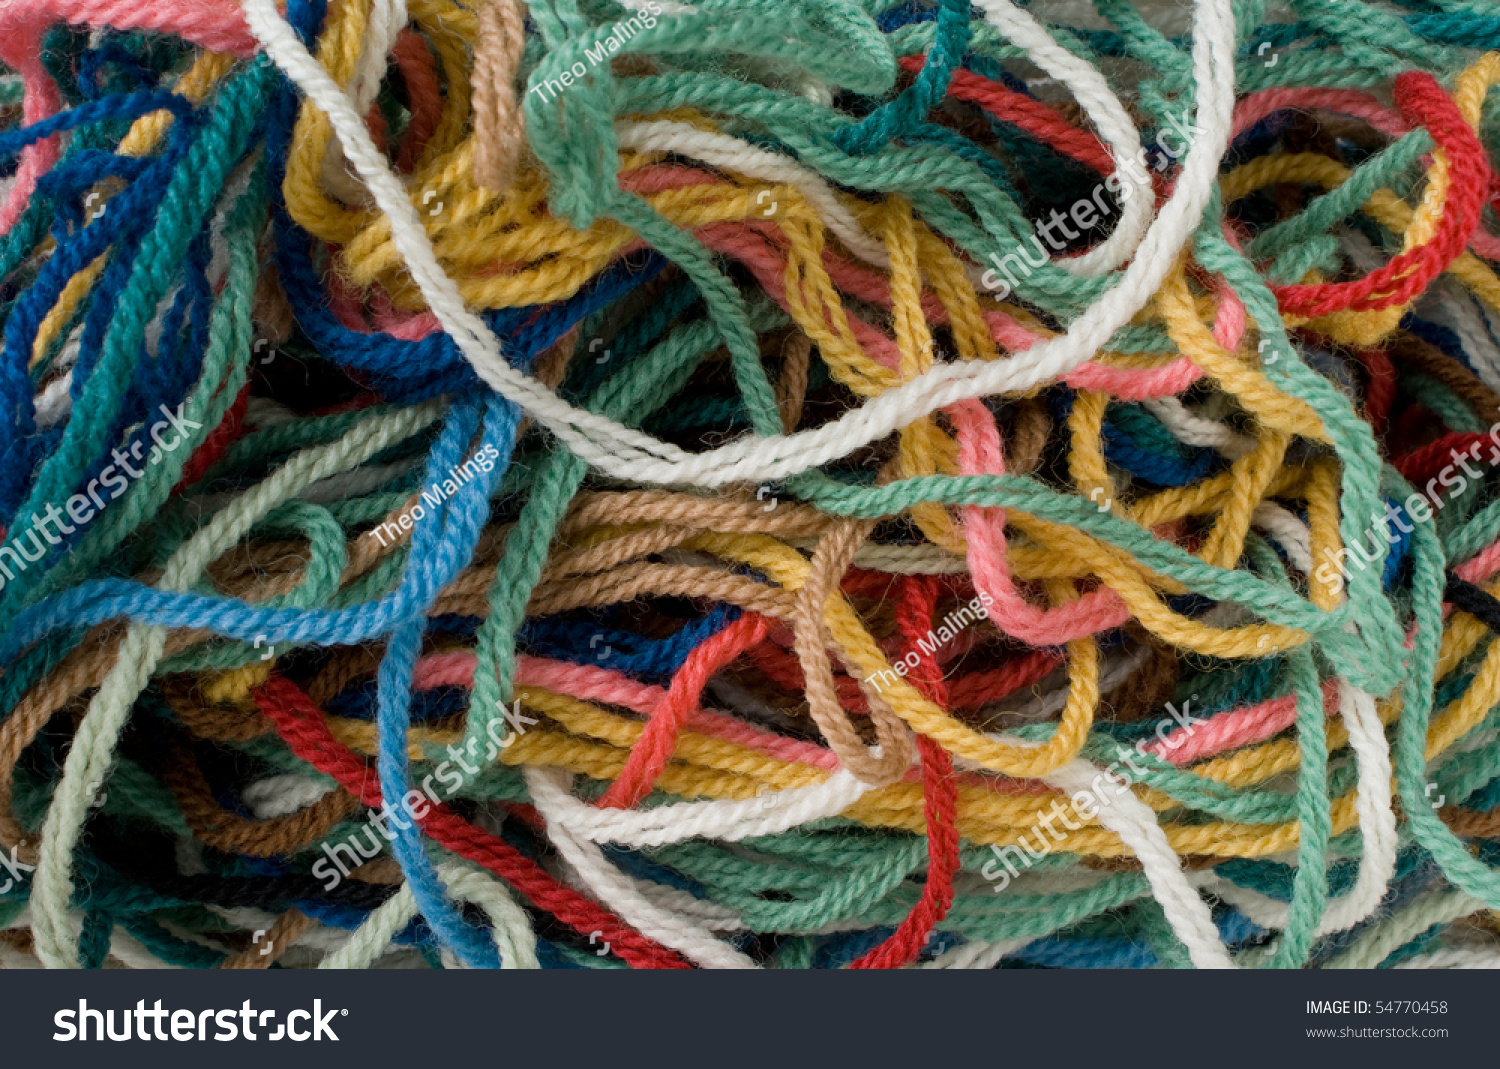 Tangle Of Wool. Suitable For Use As Background. Stock Photo 54770458 ...